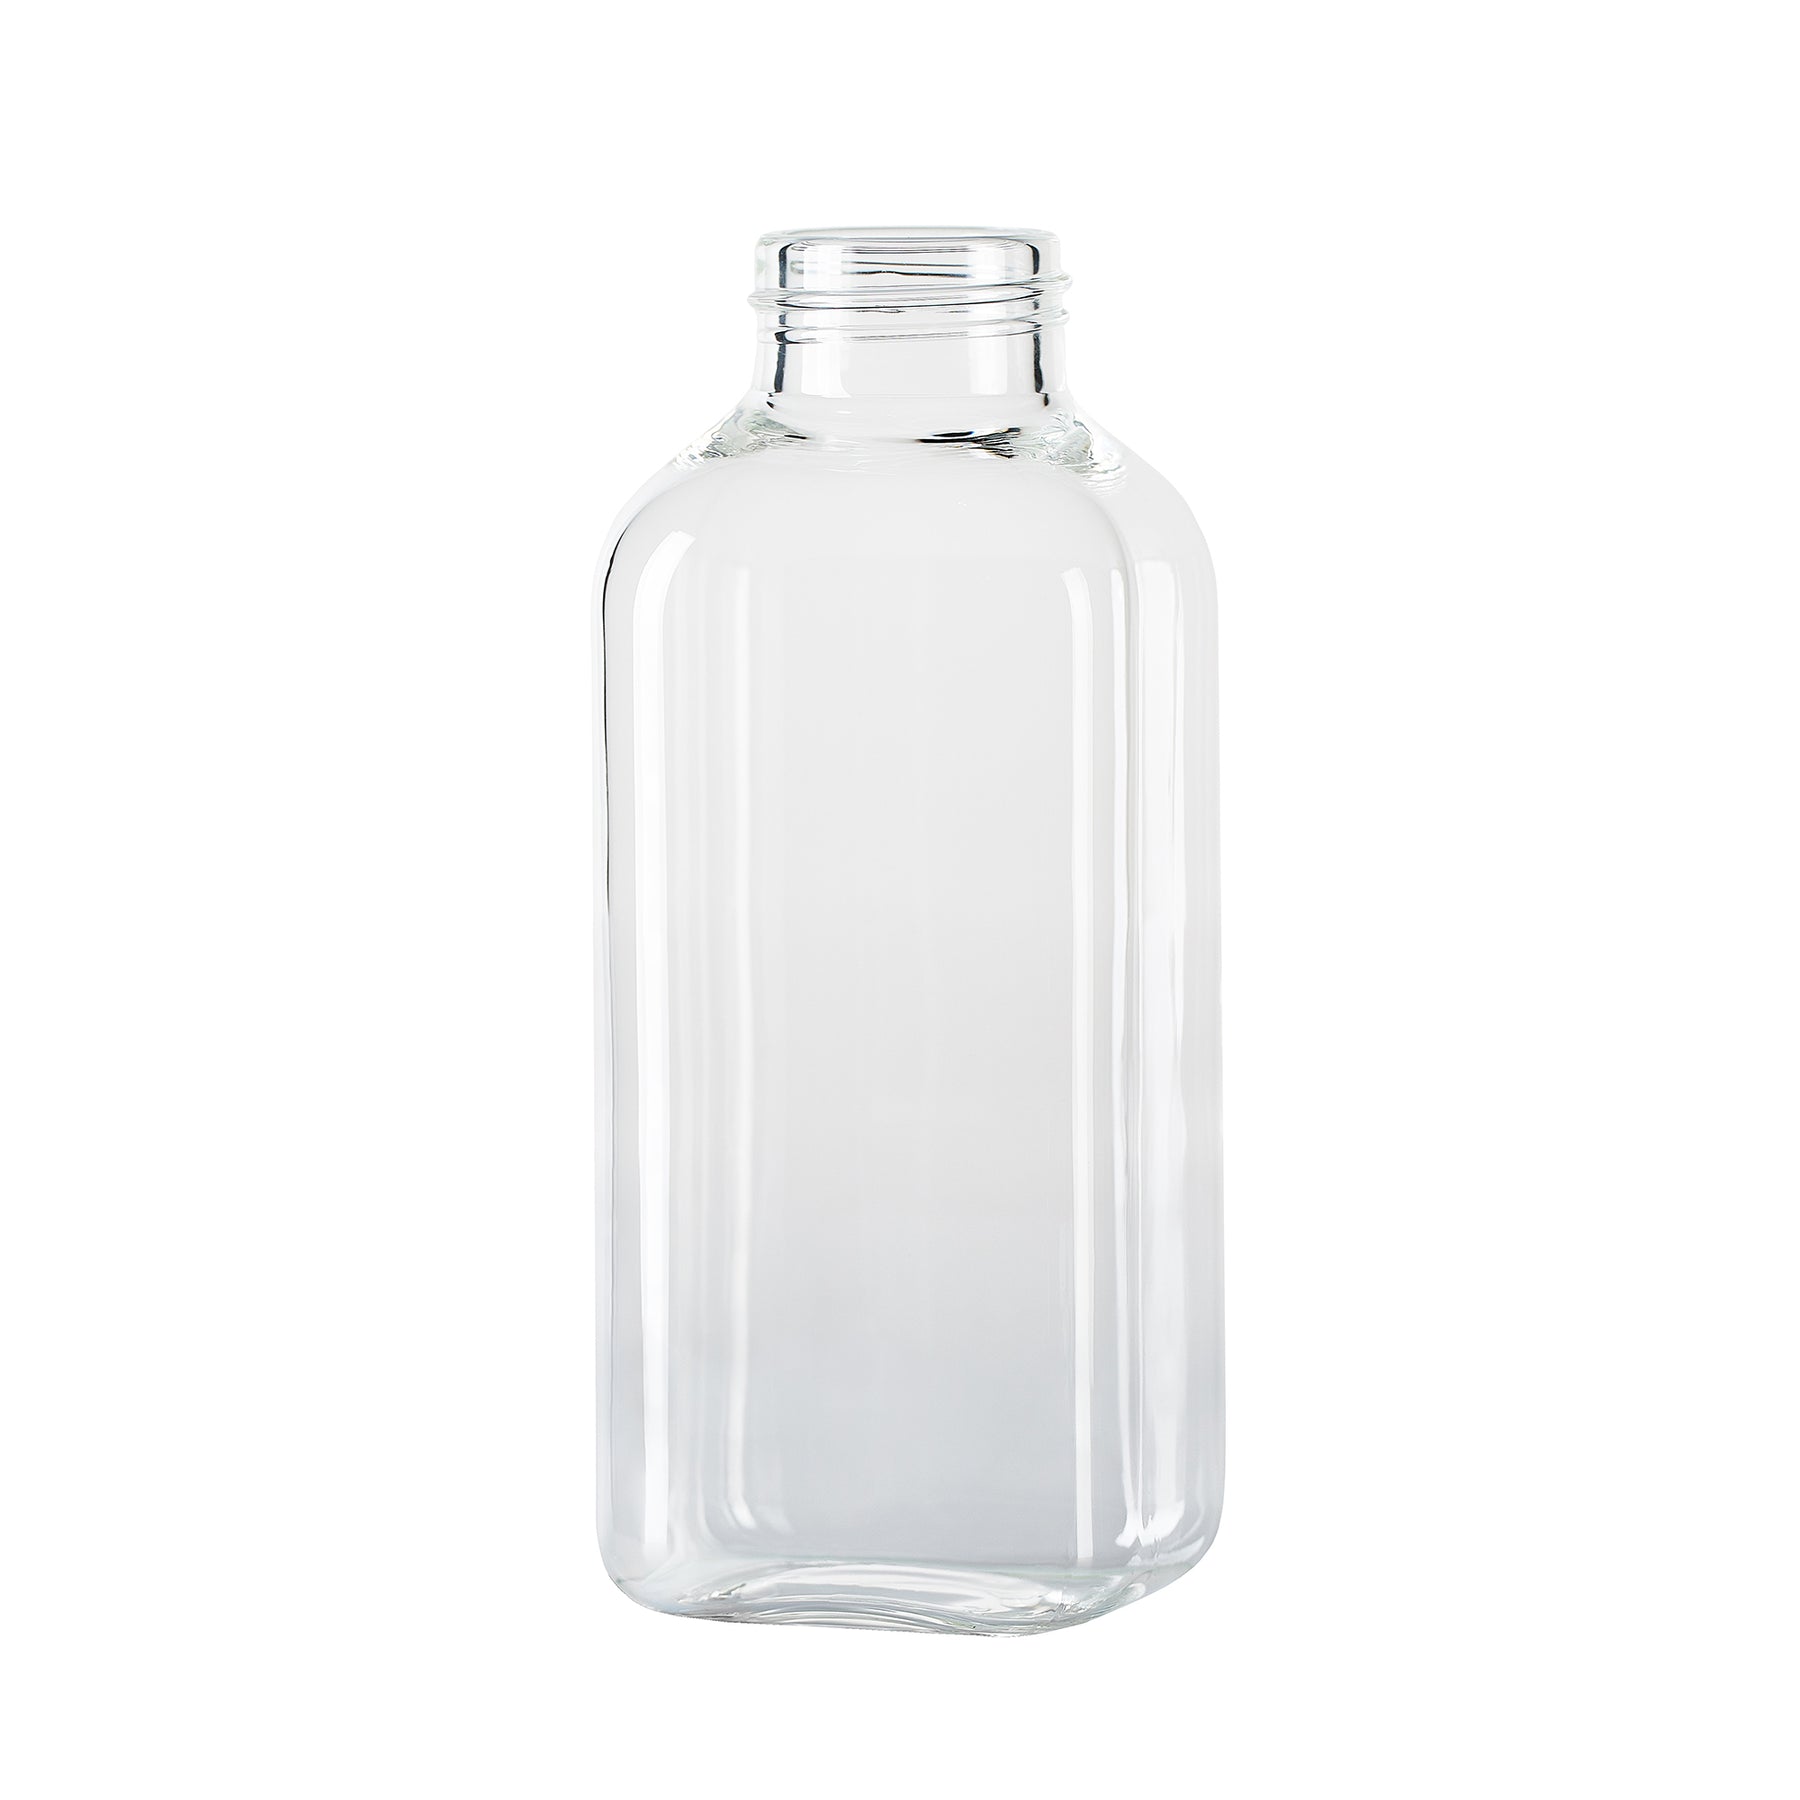 Squireme  Glass Bottle with Silicone Sleeve